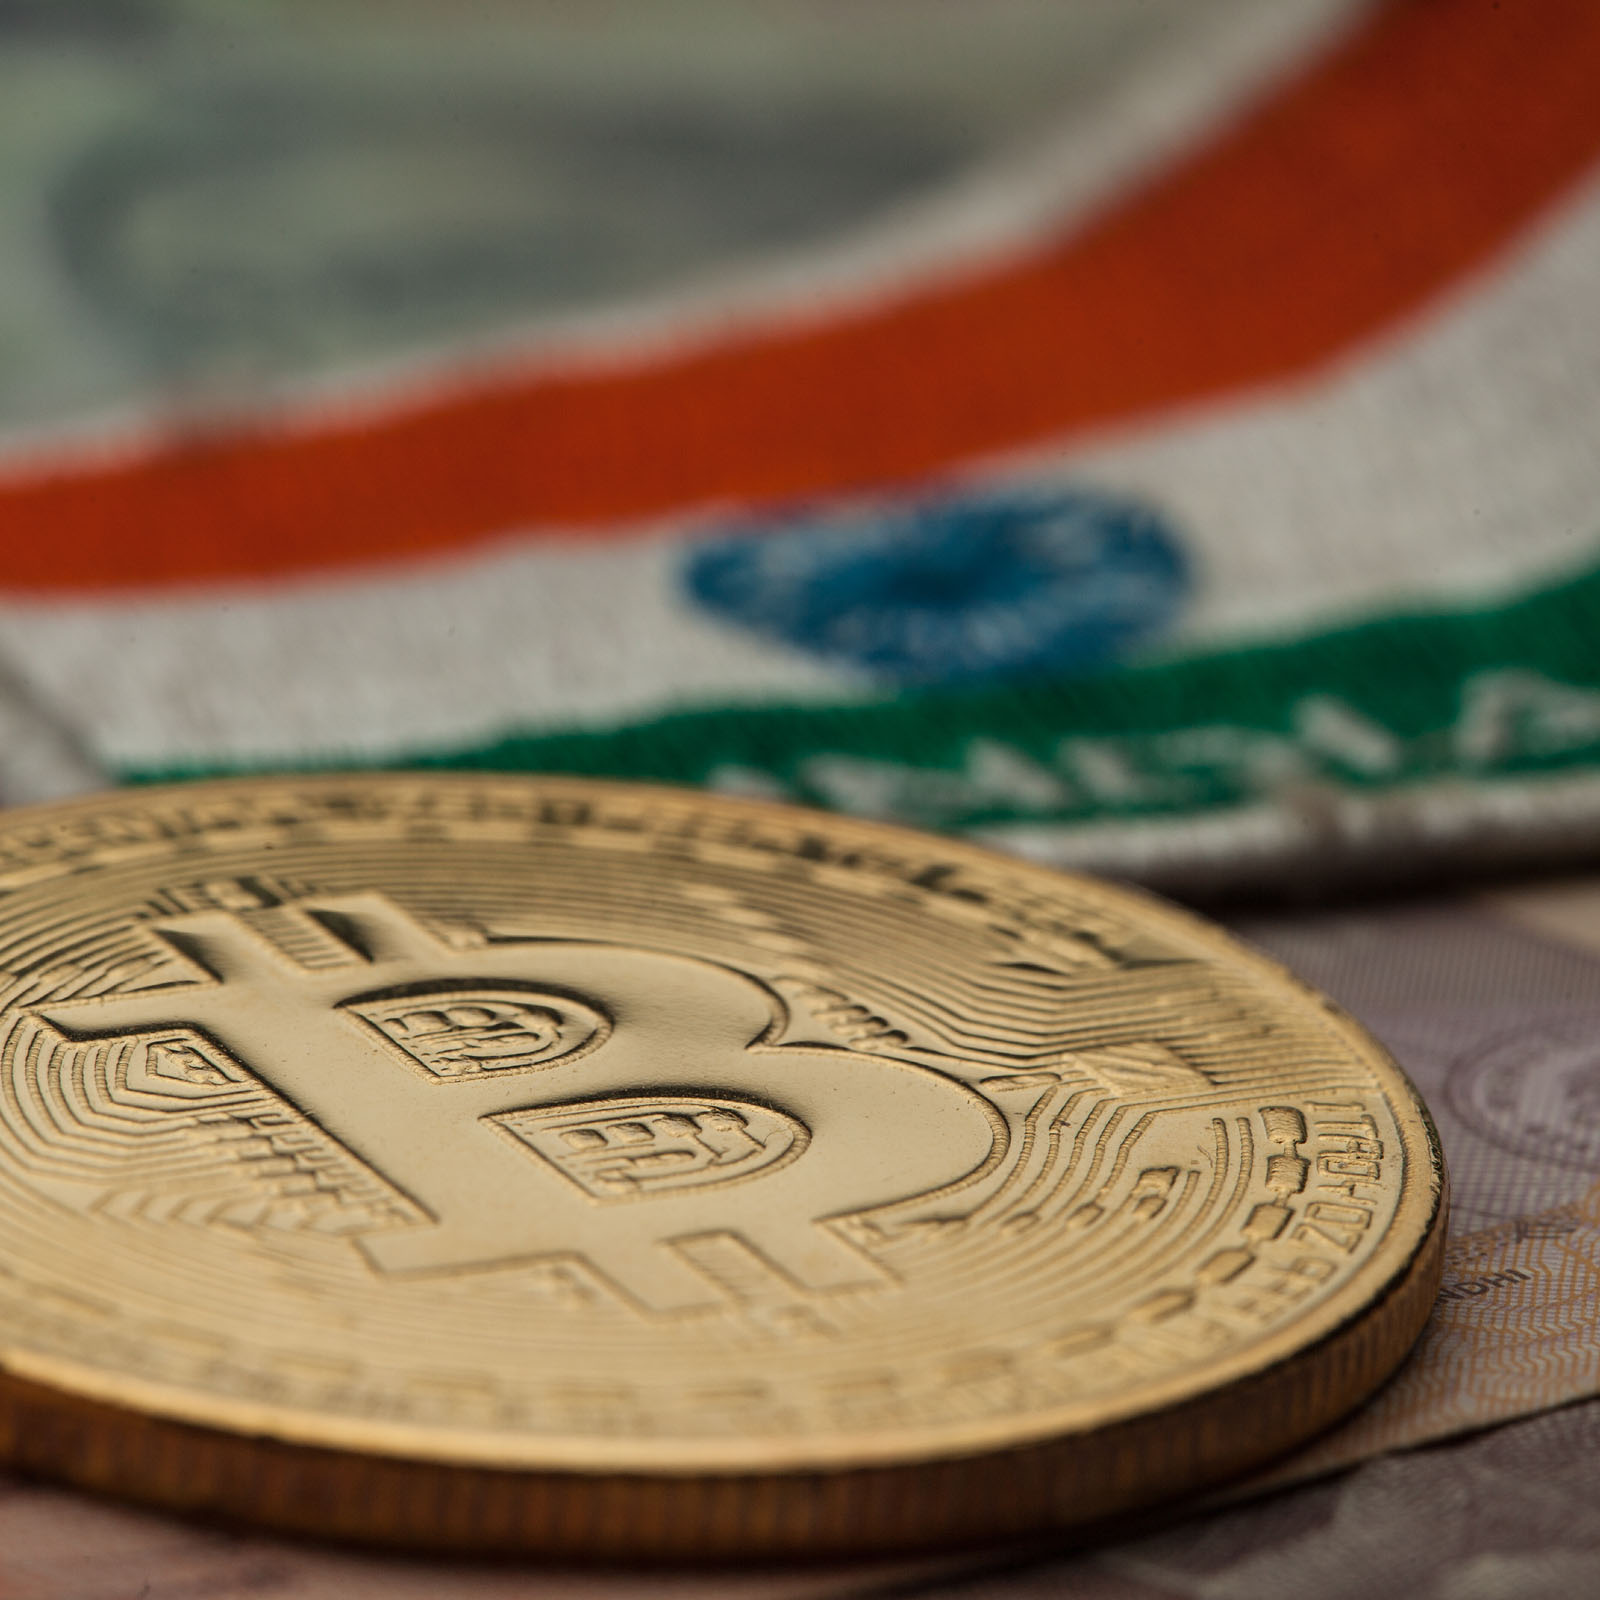 India Can’t Regulate Bitcoin, Influential Official Says